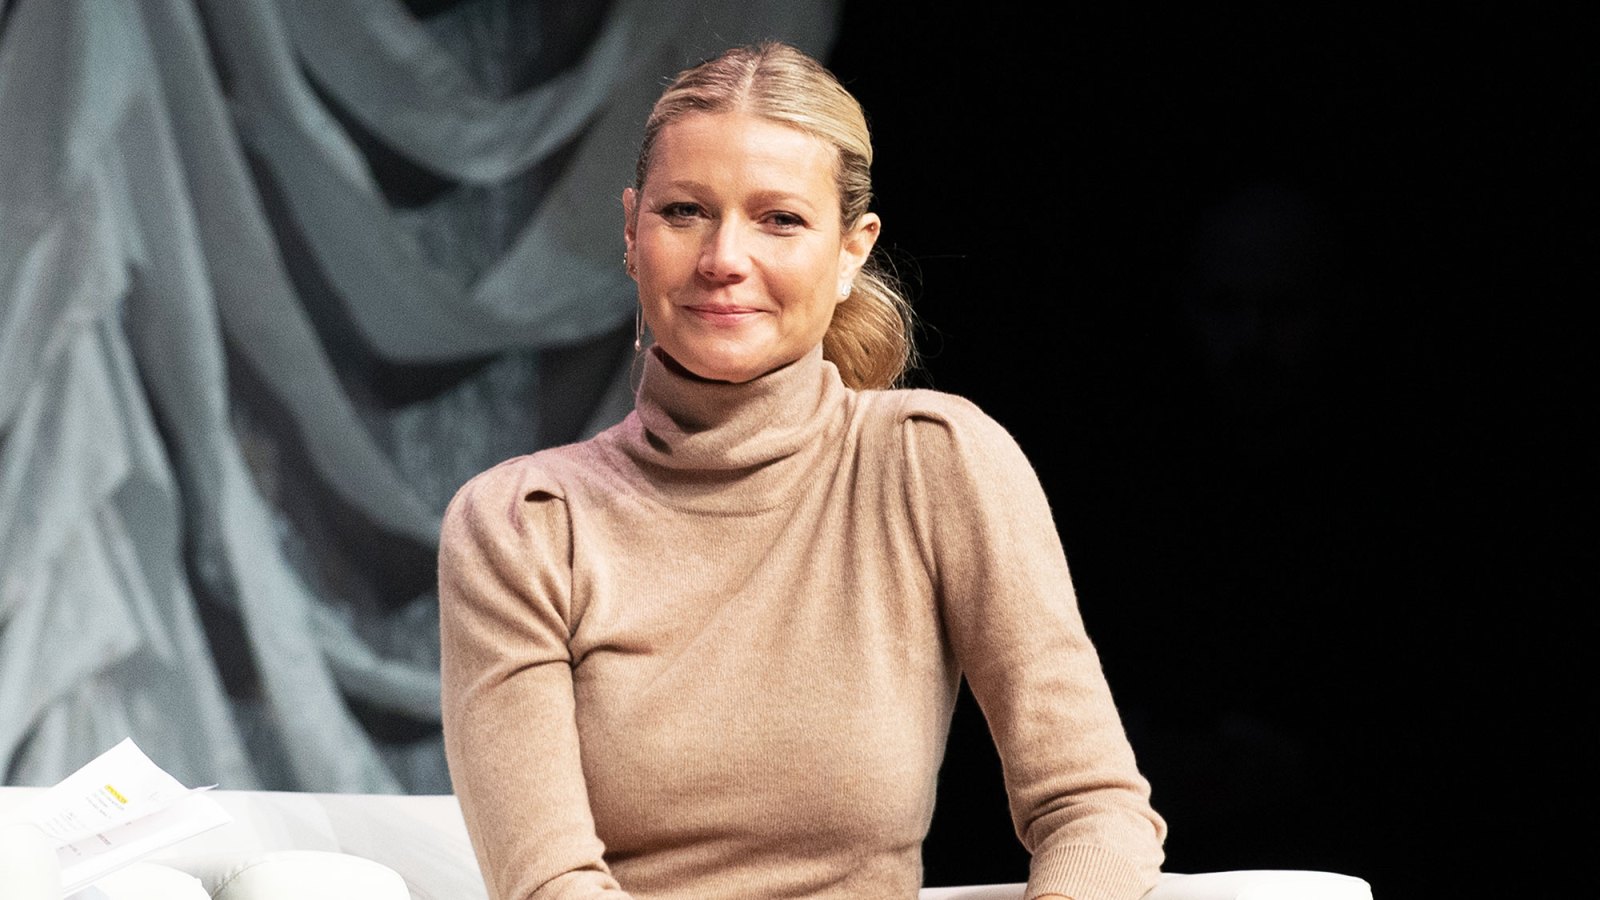 Gwyneth Paltrow: ‘I’ll Write a Book’ One Day About ‘Conscious Uncoupling’